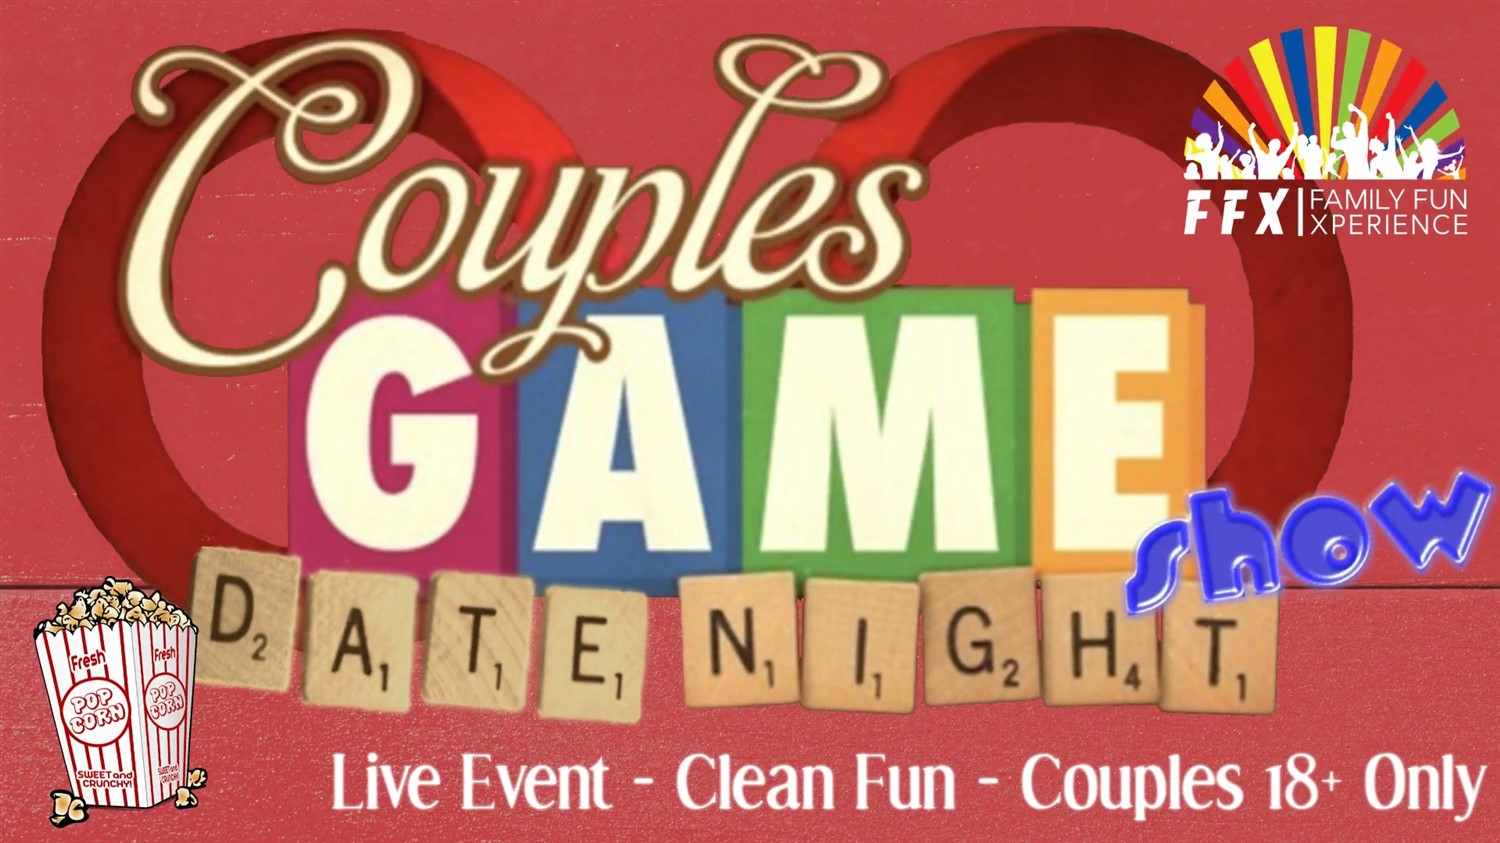 Couples Date Night Game Show! Live - Couples Only - FUN! on ago. 25, 19:00@FFX Theatre - Pick a seat, Buy tickets and Get information on Family Fun Xperience tickets.ffxshow.org